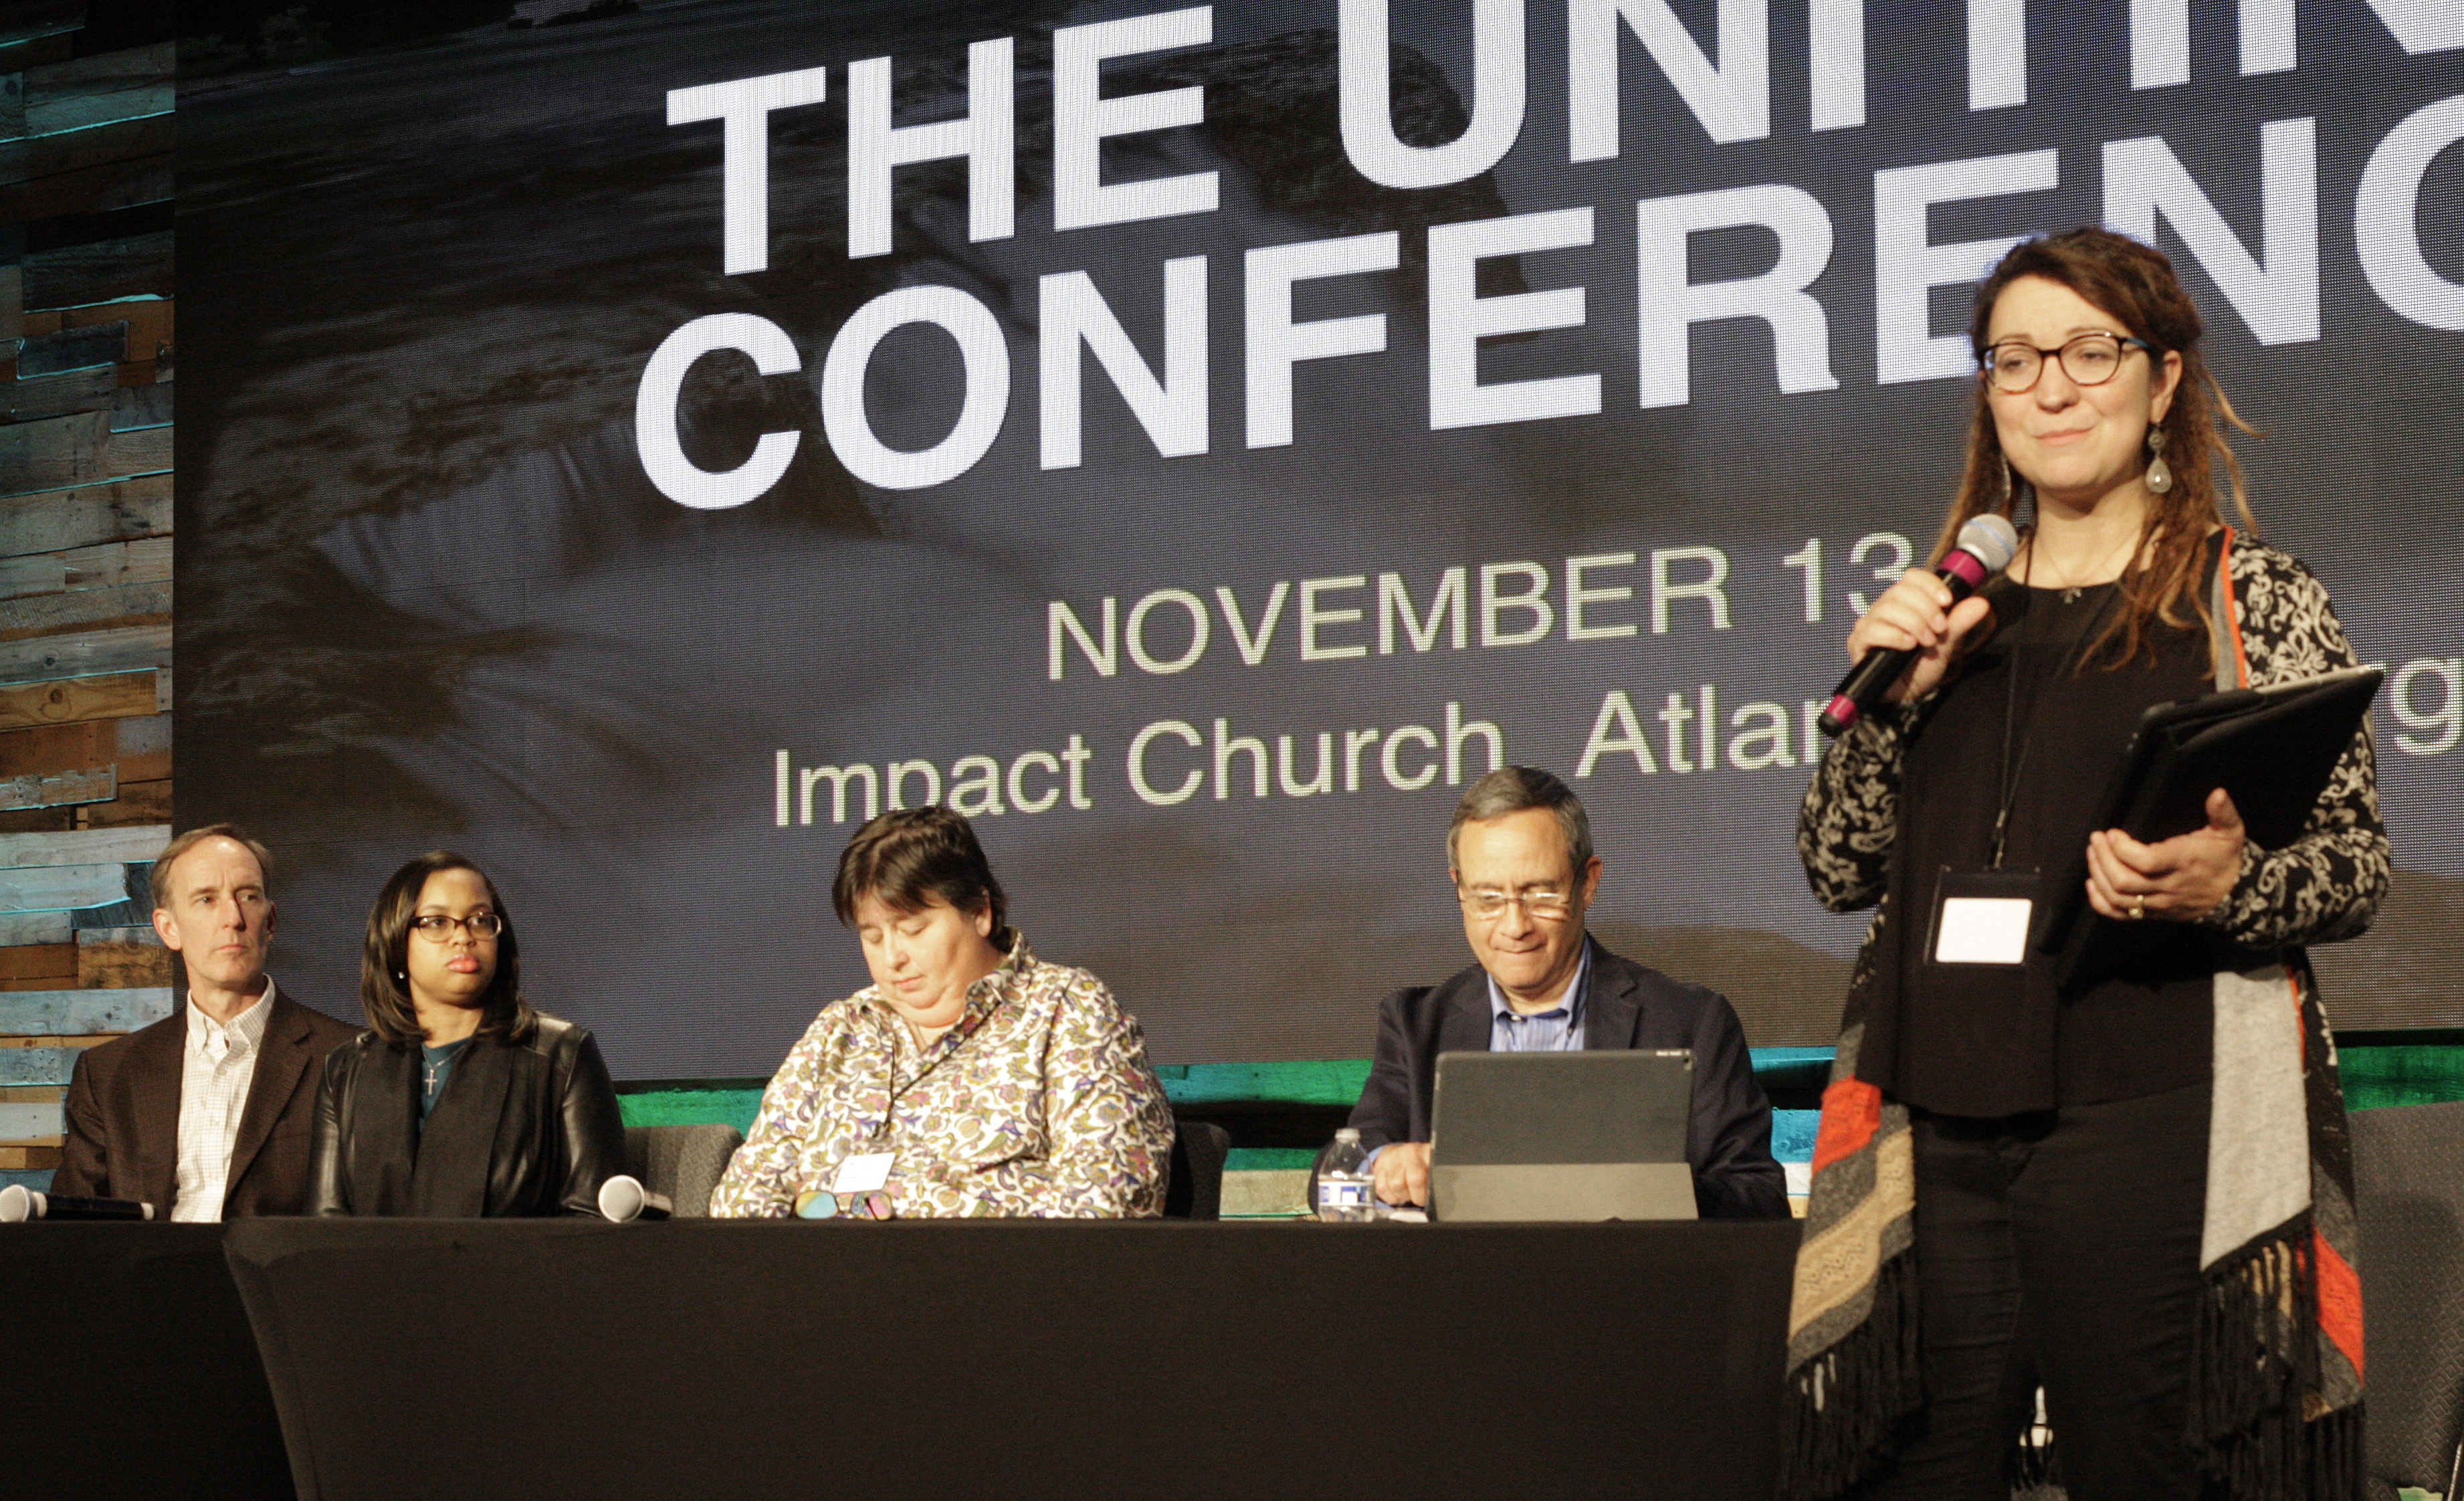 Panelists addressed attendees at the Uniting Methodist Conference. The panelists (from left) are: The Revs. Tom Berlin and Jasmine Smothers, Helen Ryde, Neil Alexander and the Rev. Rachel Baughman. Photo by Kathy L. Gilbert, UMNS.